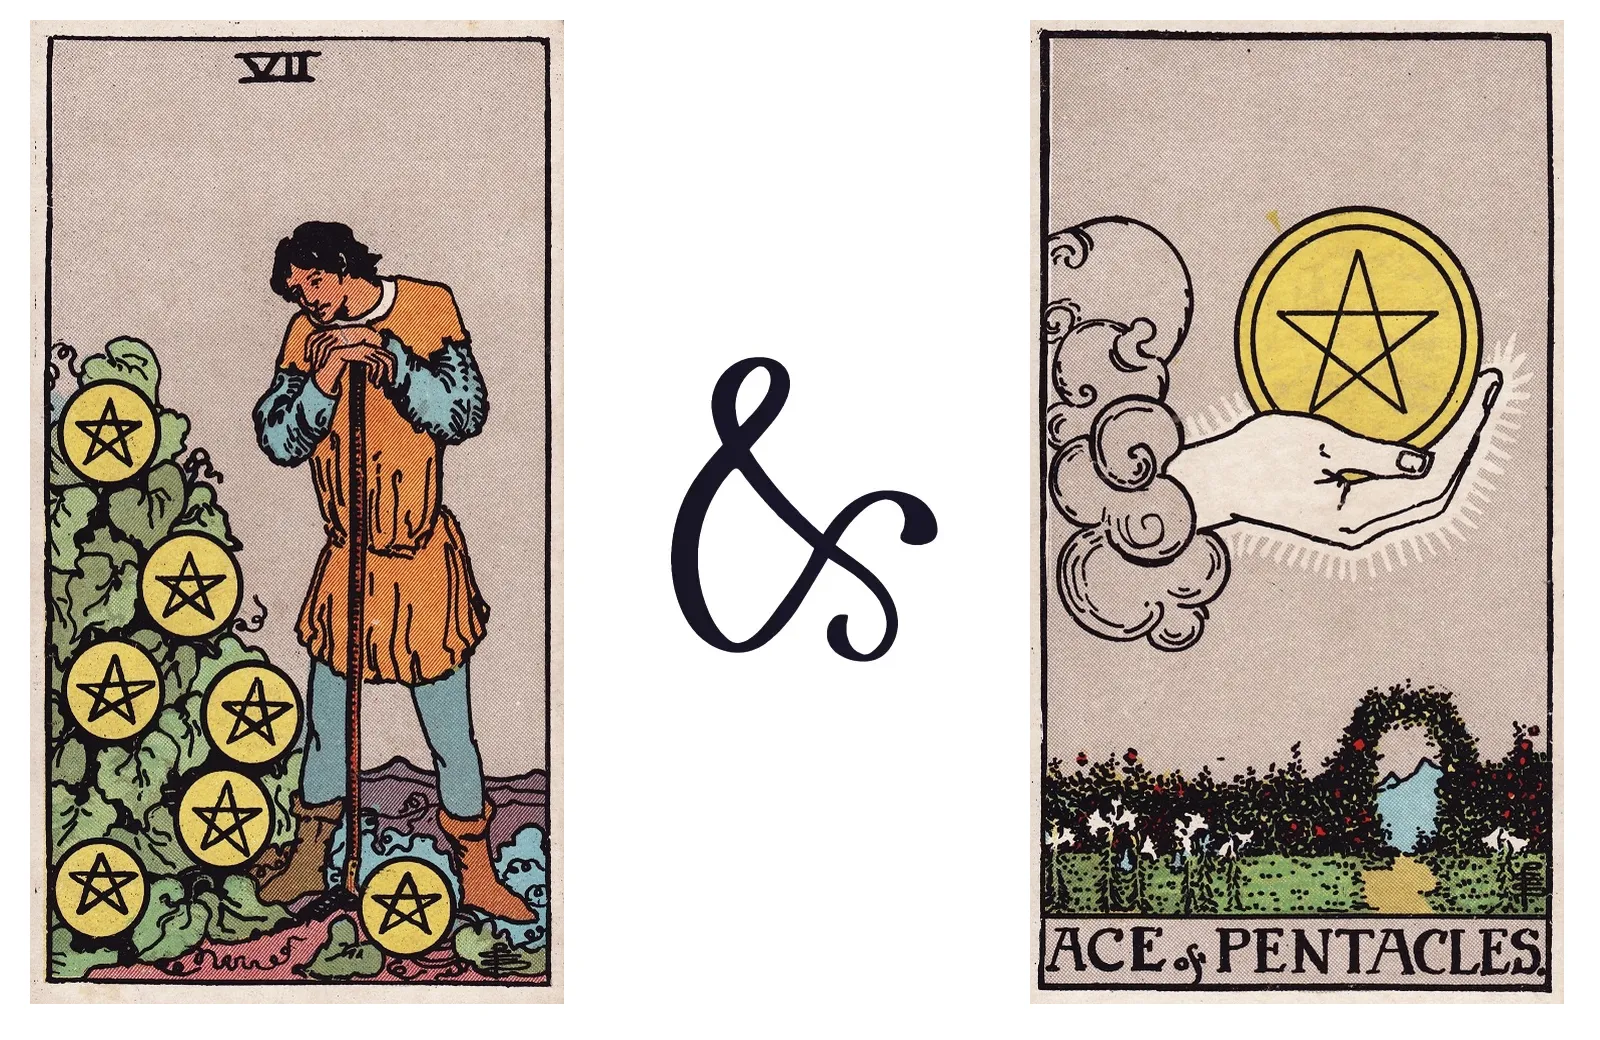 Seven of Pentacles and Ace of Pentacles